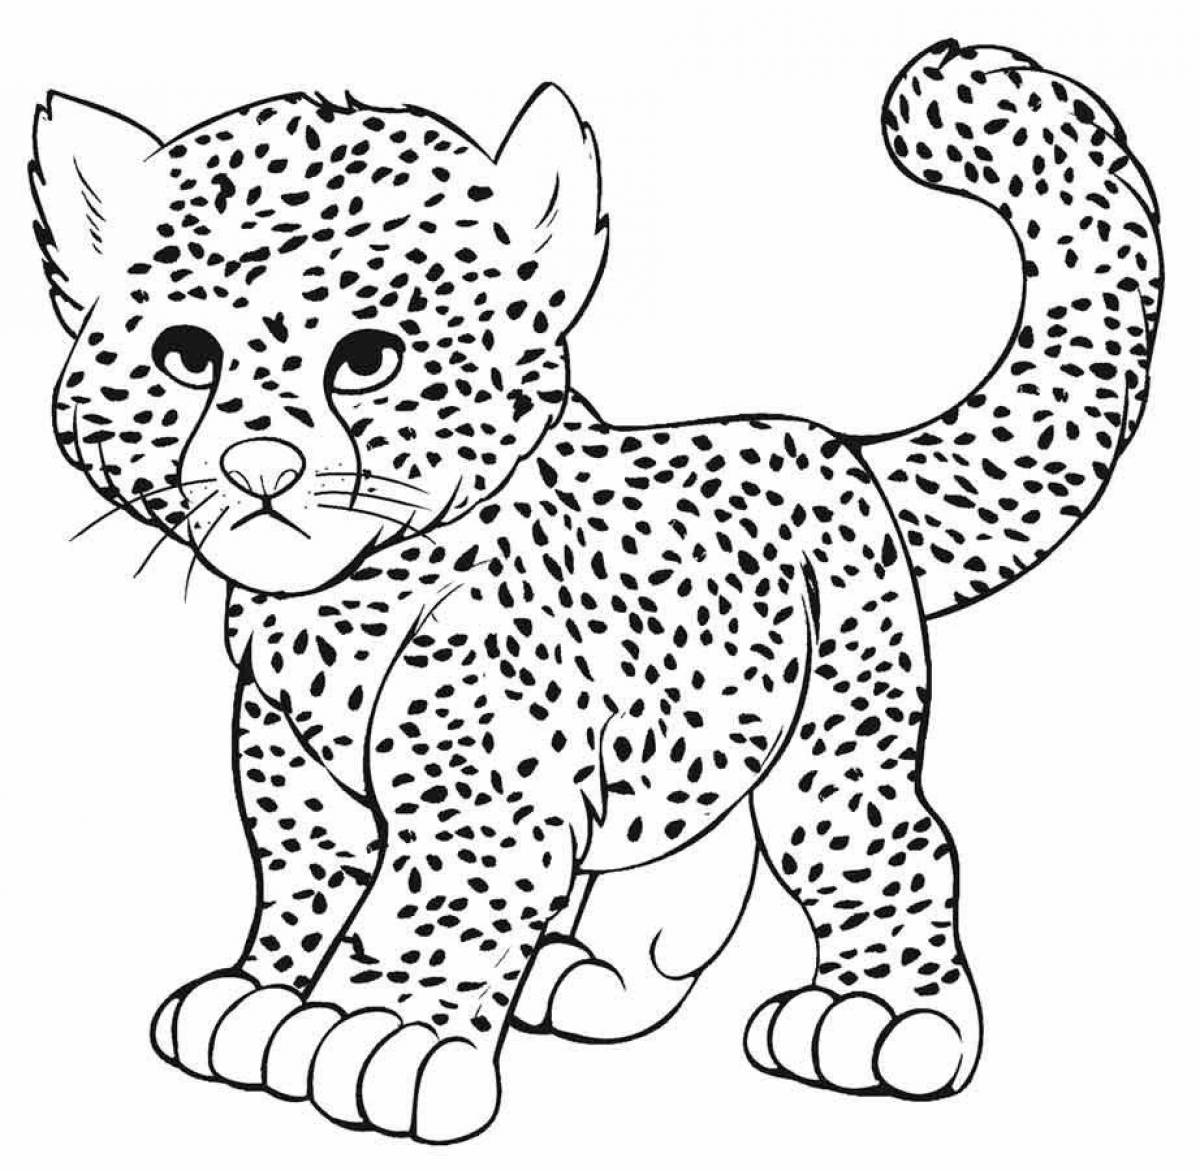 Adorable wild animal coloring book for kids 6-7 years old